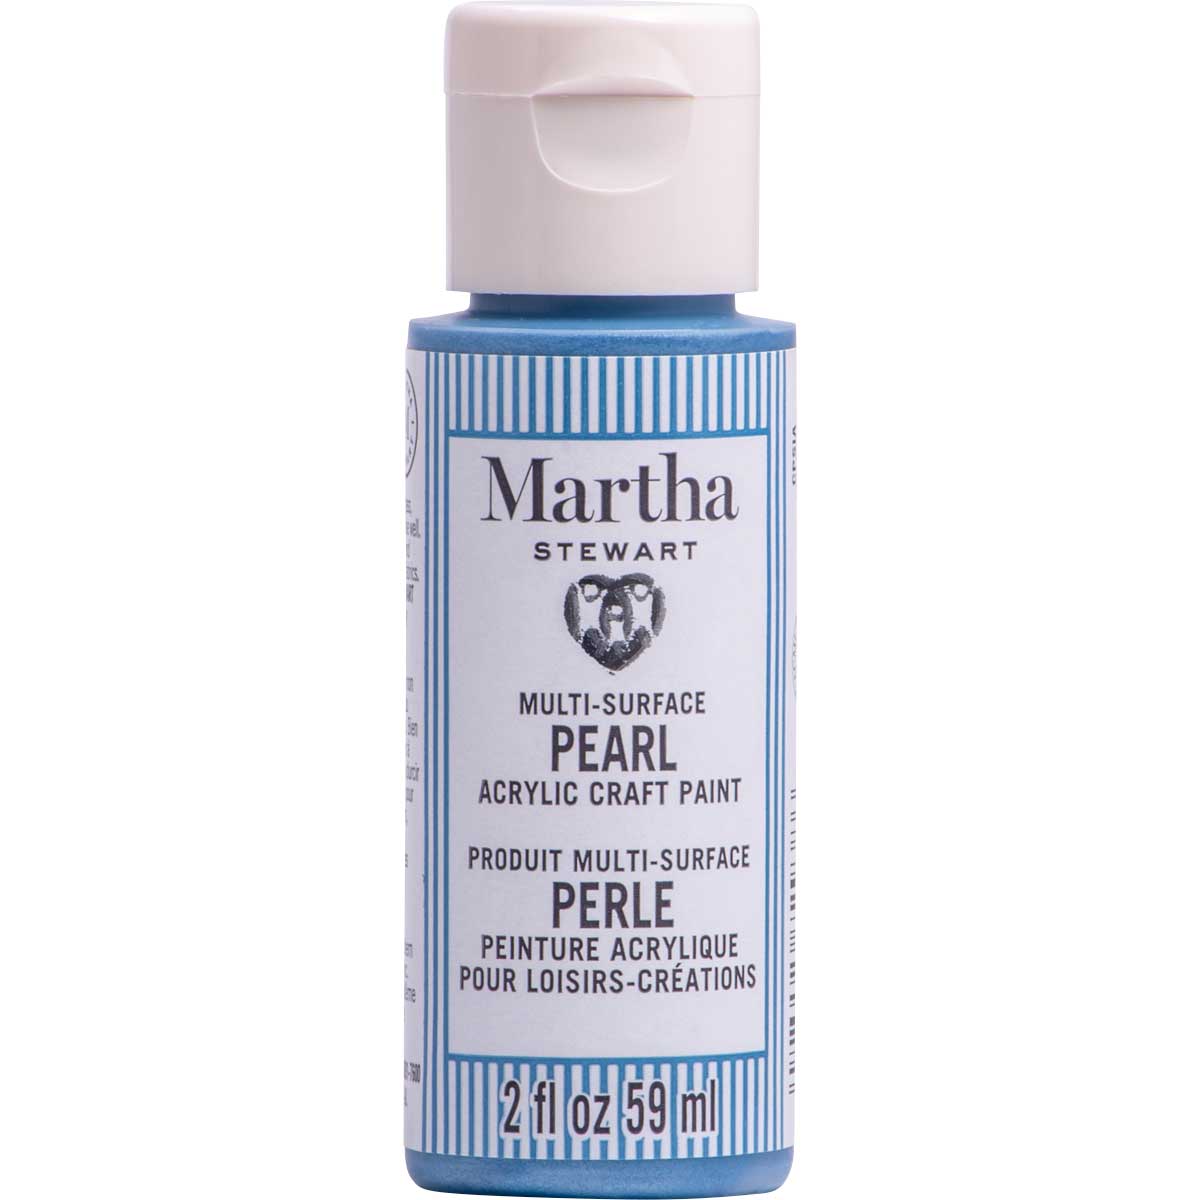 Martha Stewart ® Multi-Surface Pearl Acrylic Craft Paint CPSIA - Frost Blue, 2 oz. - 72938